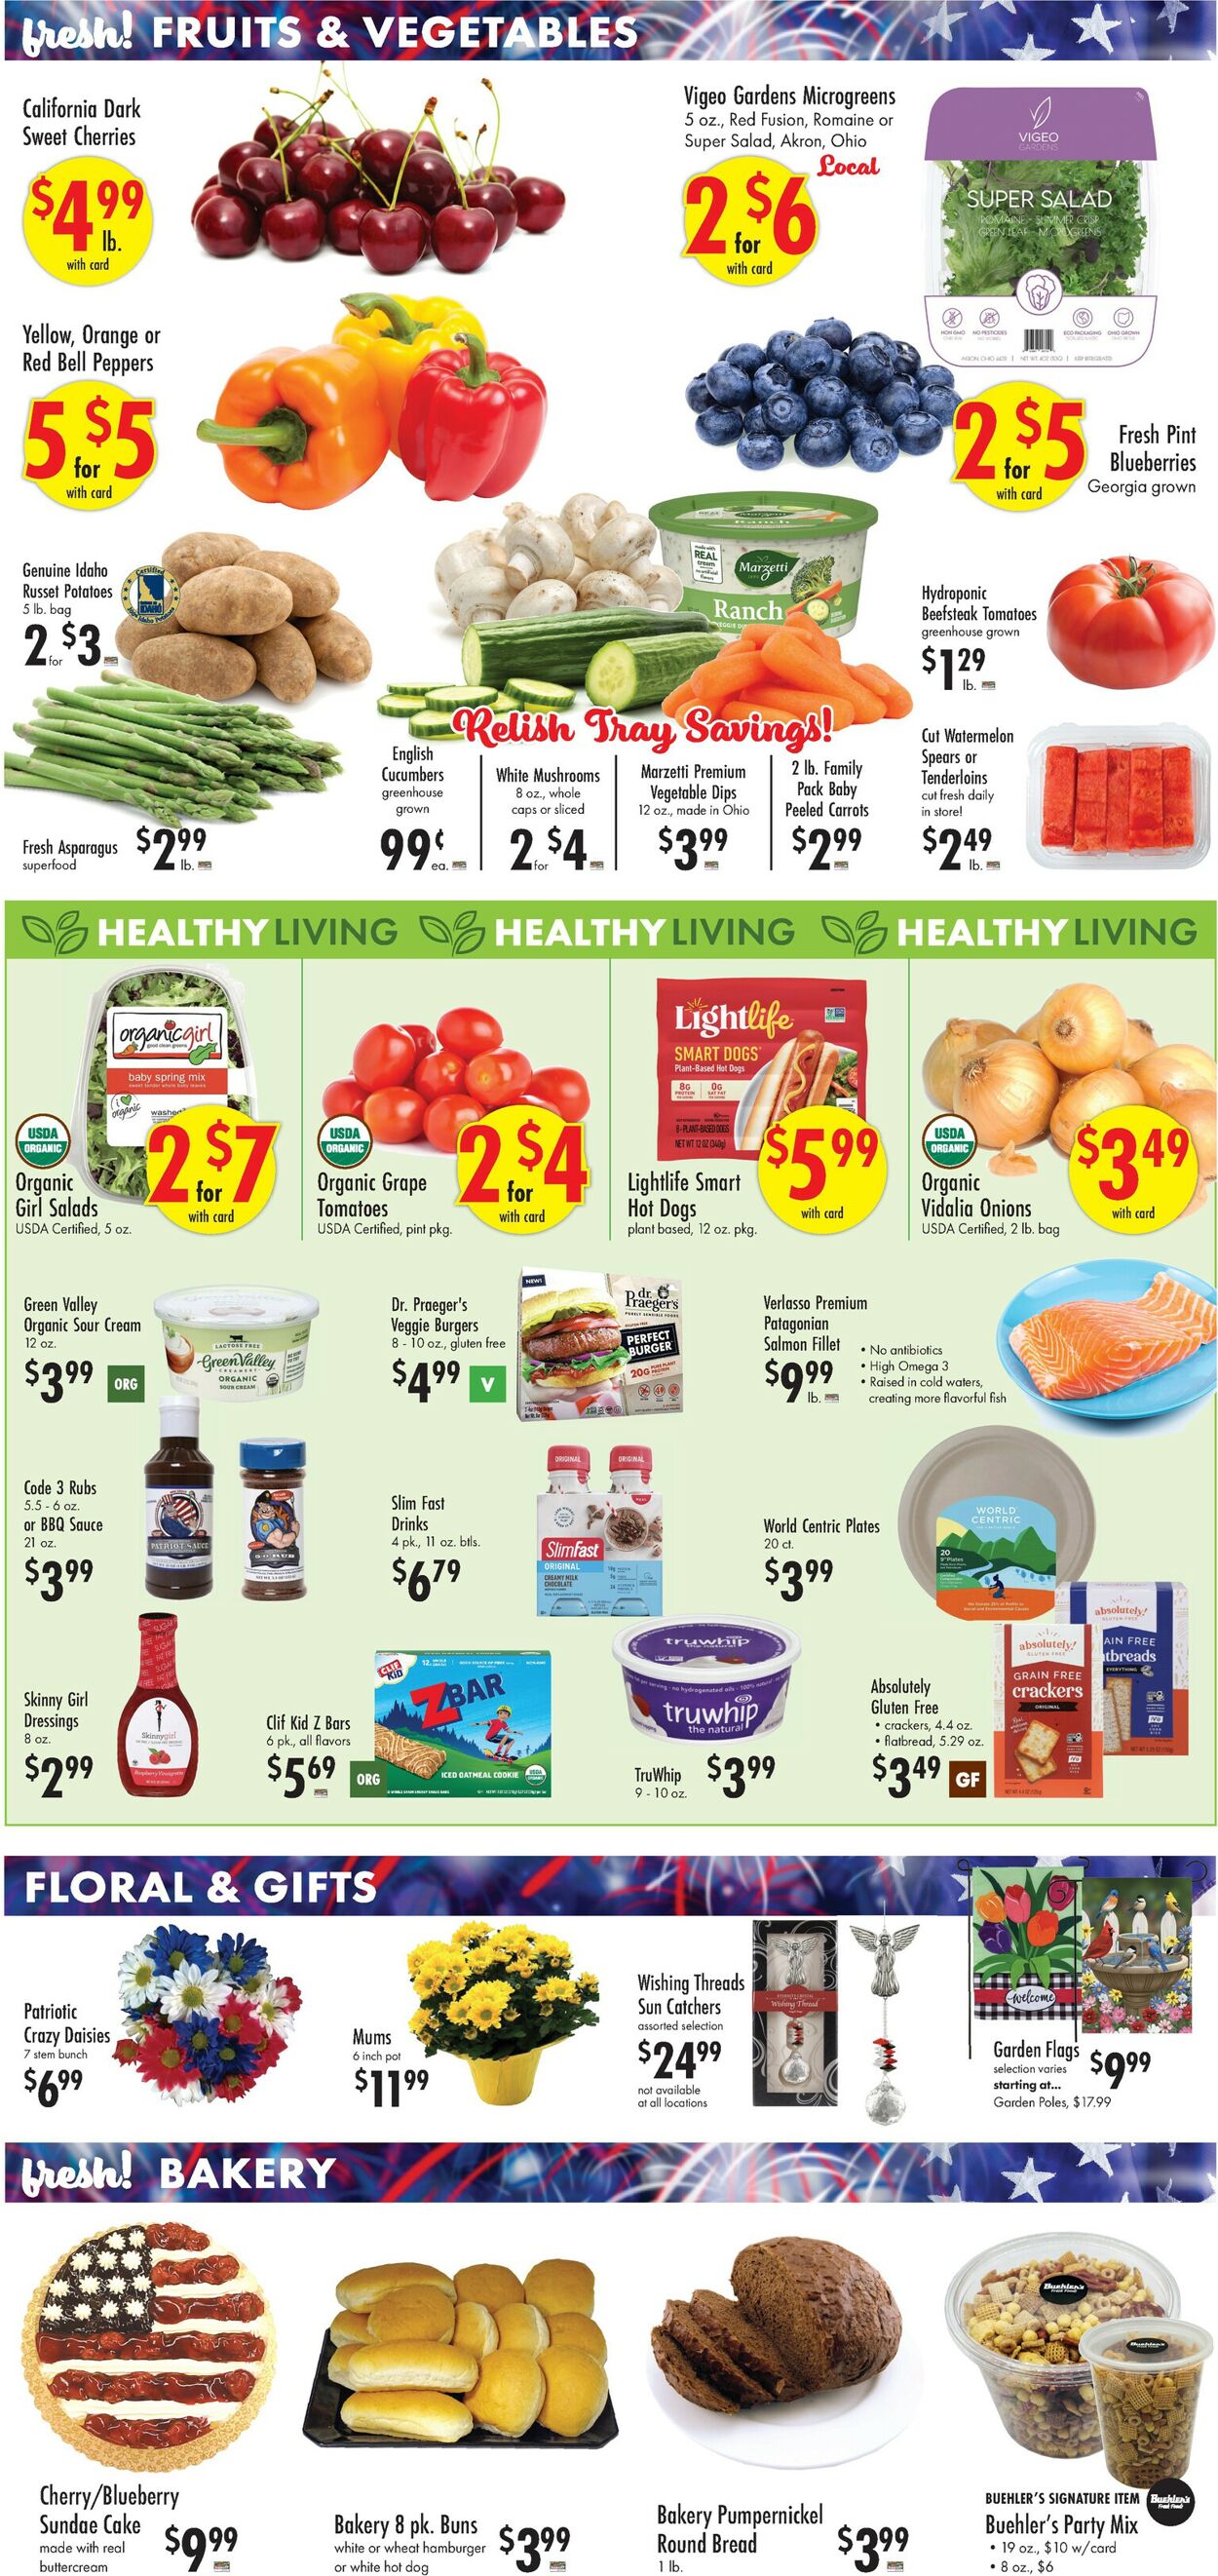 Catalogue Buehler's Fresh Foods from 05/22/2024